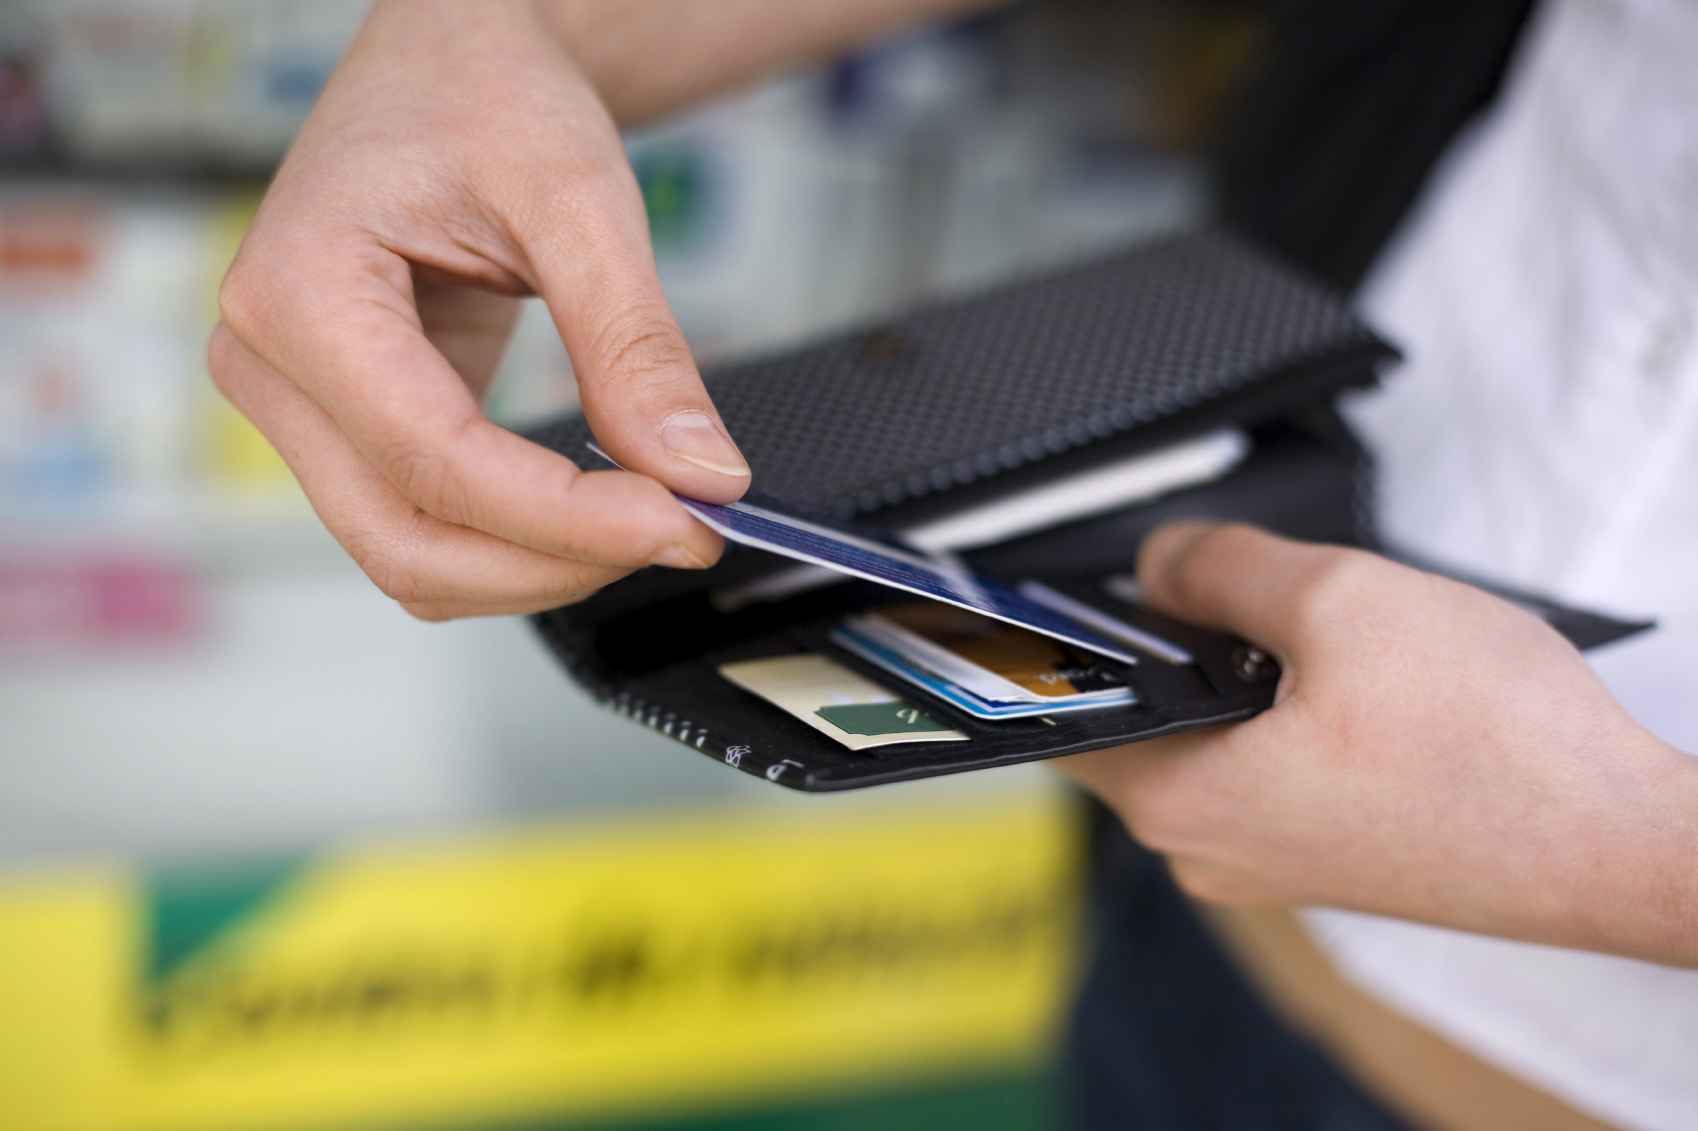 Cubits disables credit card bitcoin buying feature due to fraud